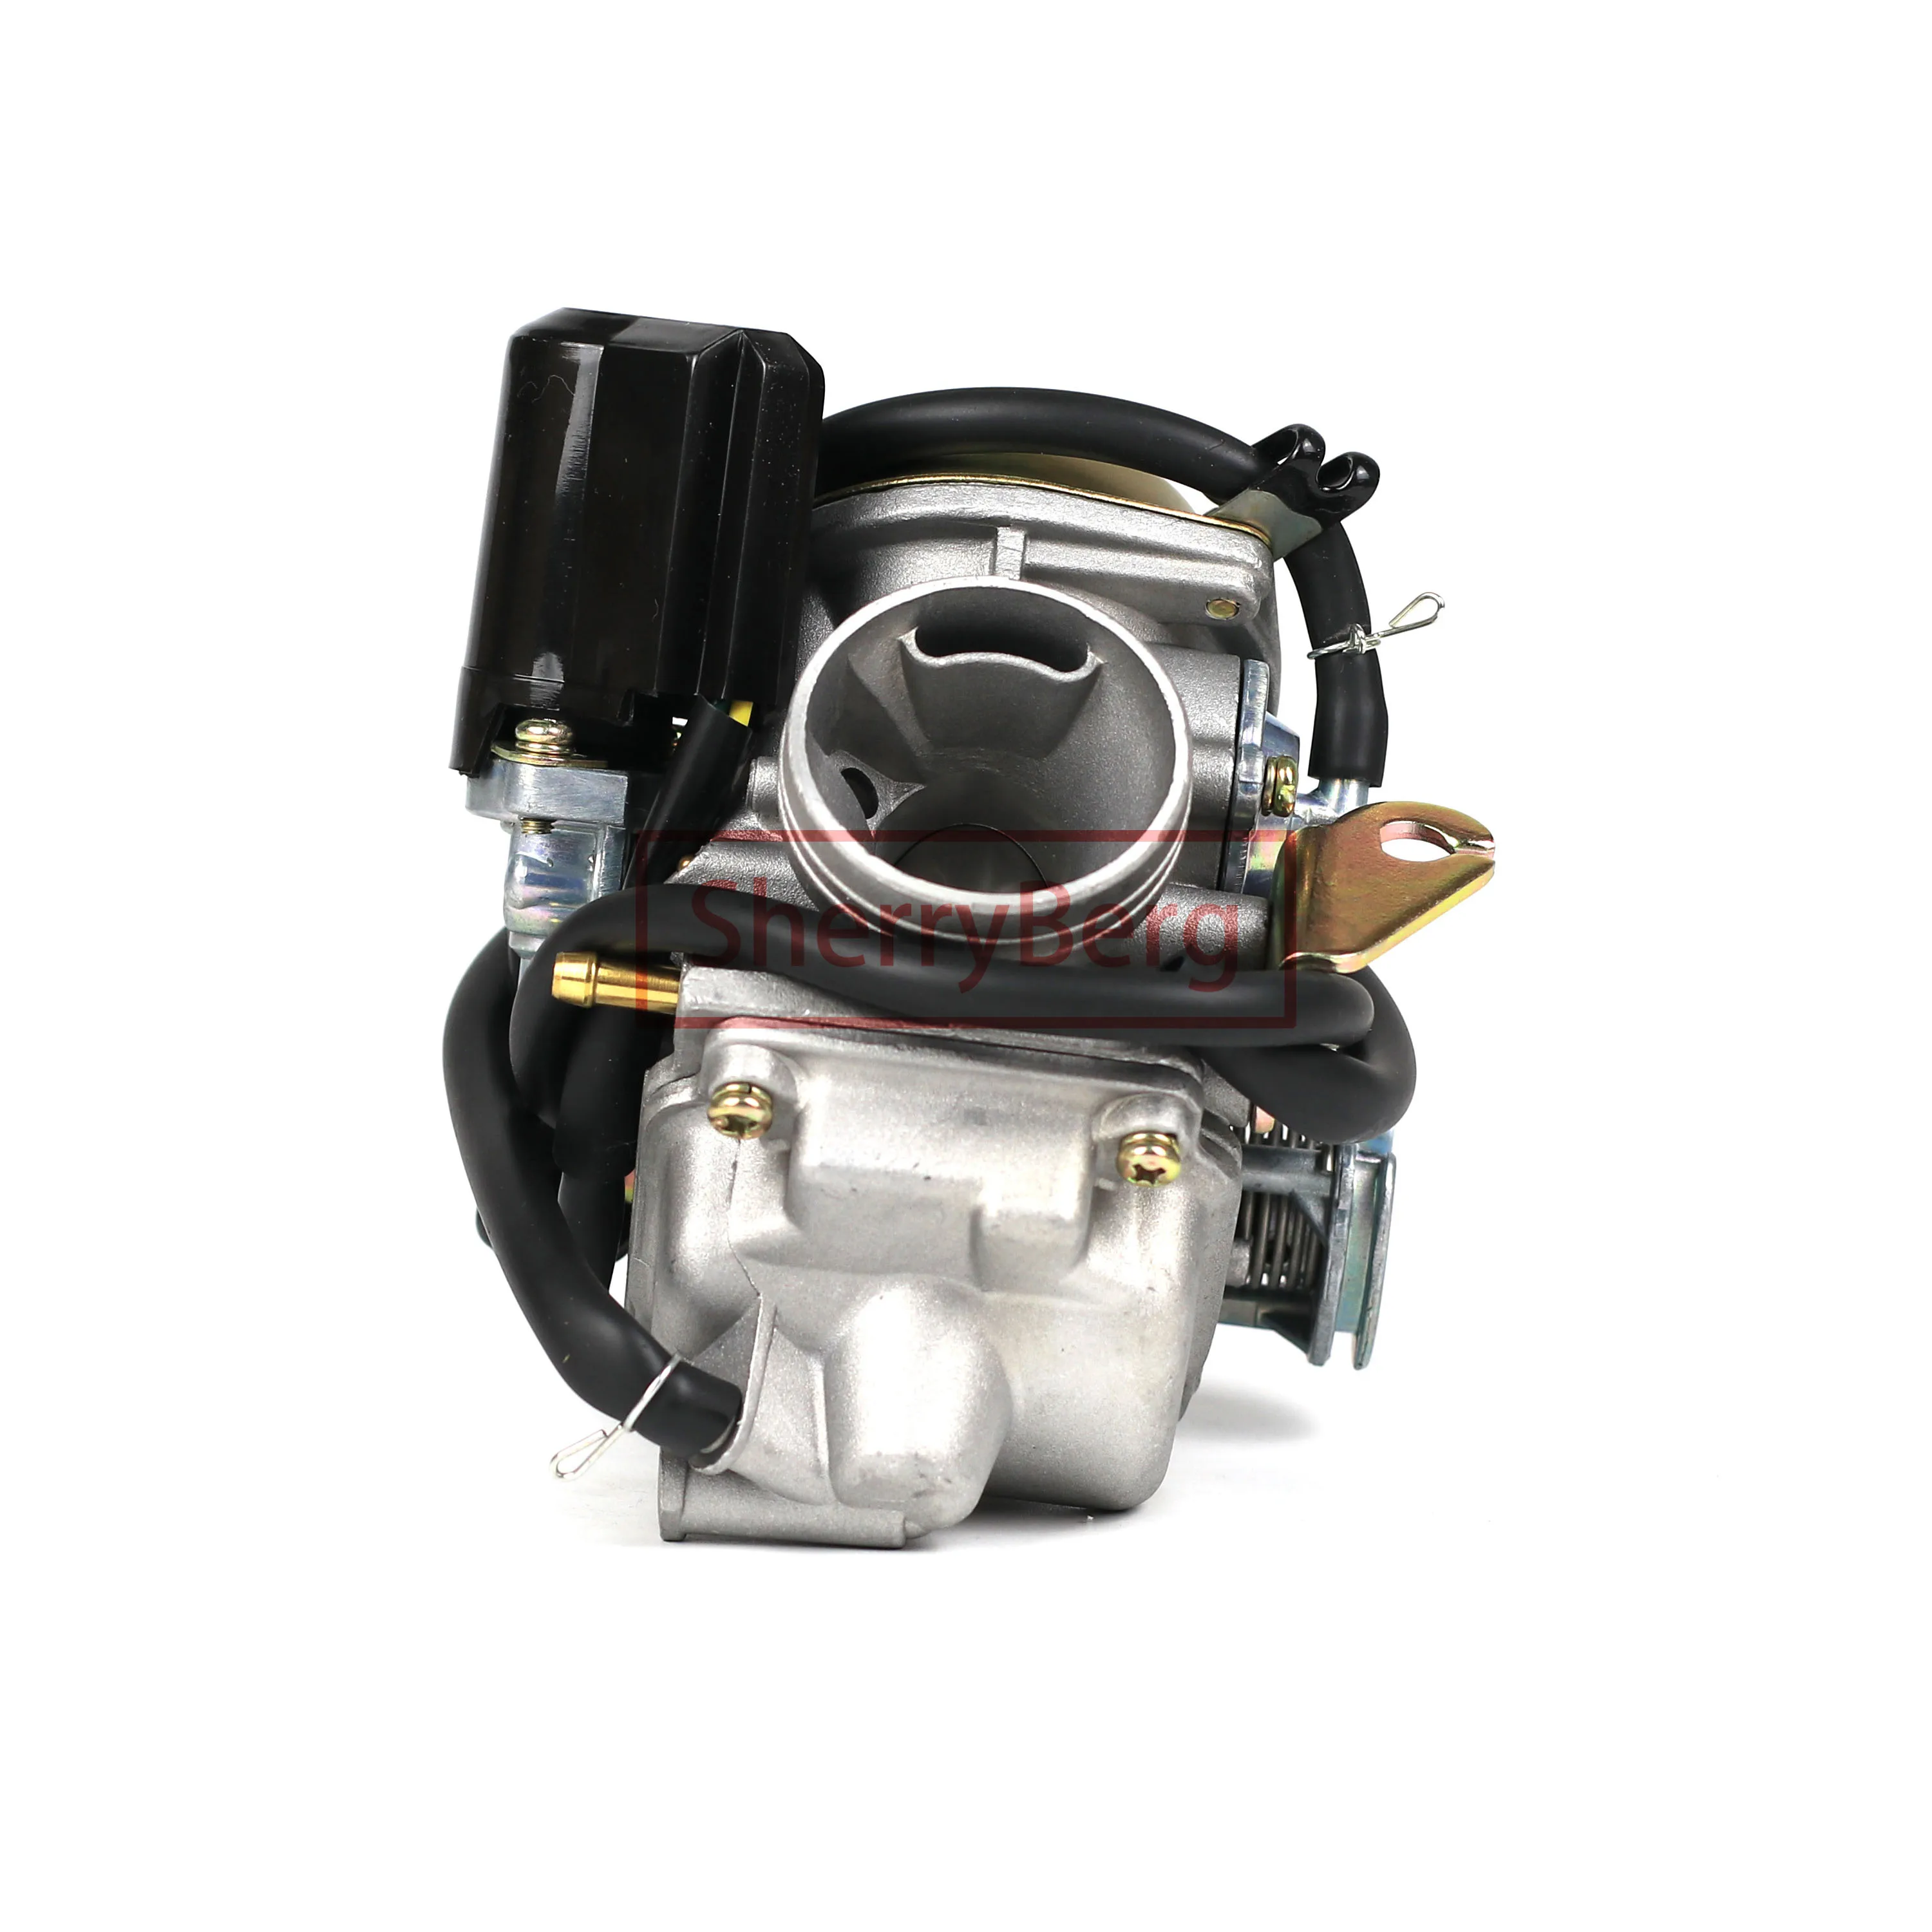 

SherryBerg Carburettor for GY6 125 Carburetor KYMCO motorcycle also fit many 125cc 24mm Carb Vergaser CARB PD24J